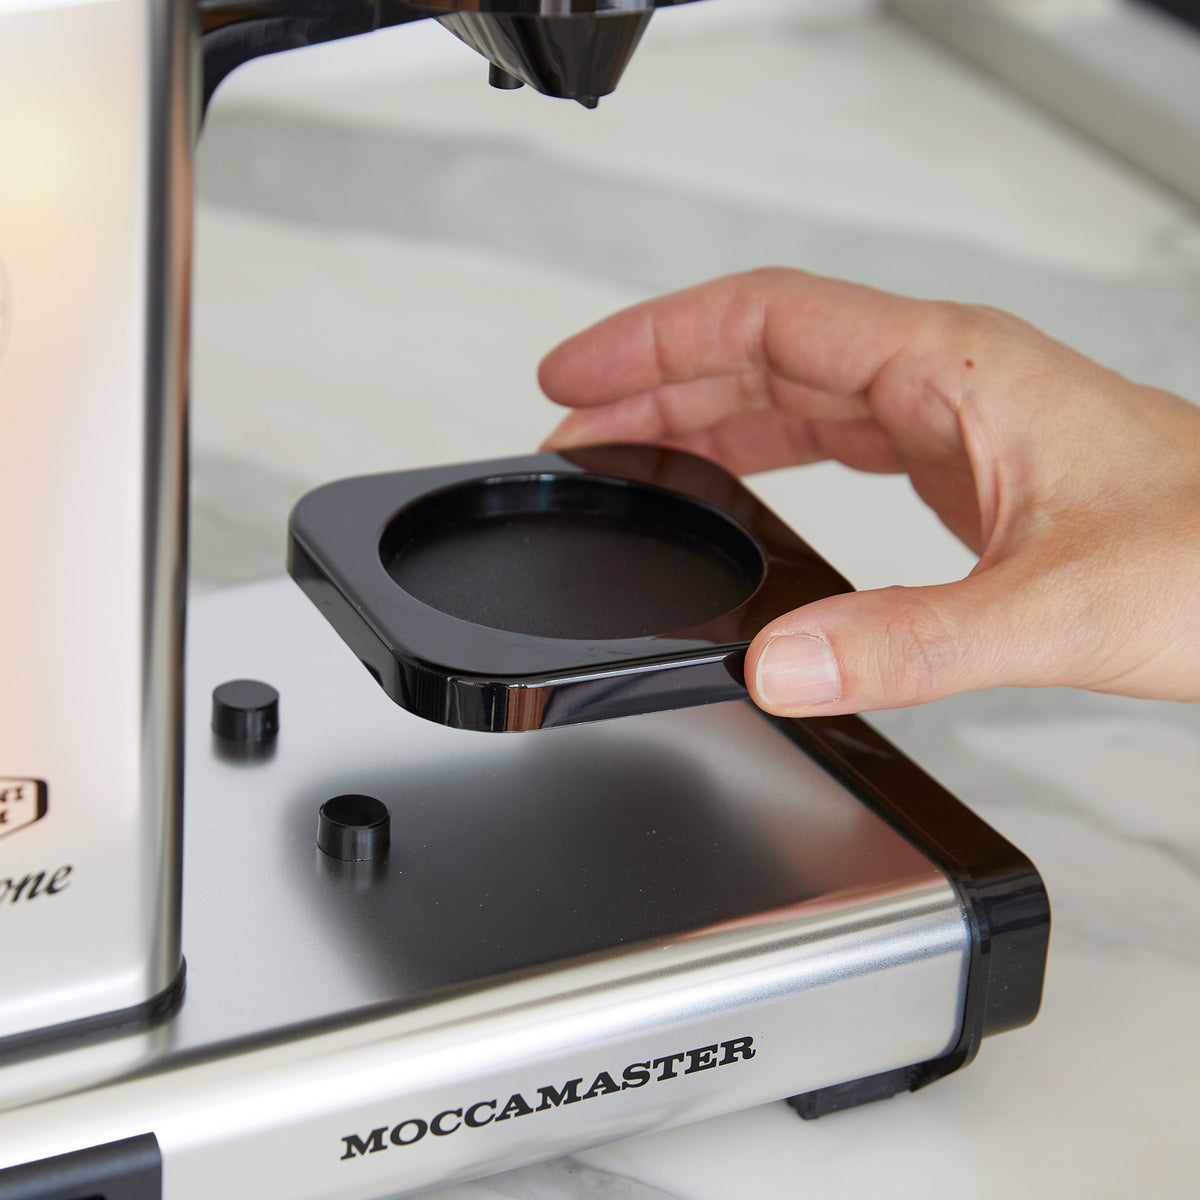 A hand removing the cup holder from a Moccamaster Cup-One coffee brewer.